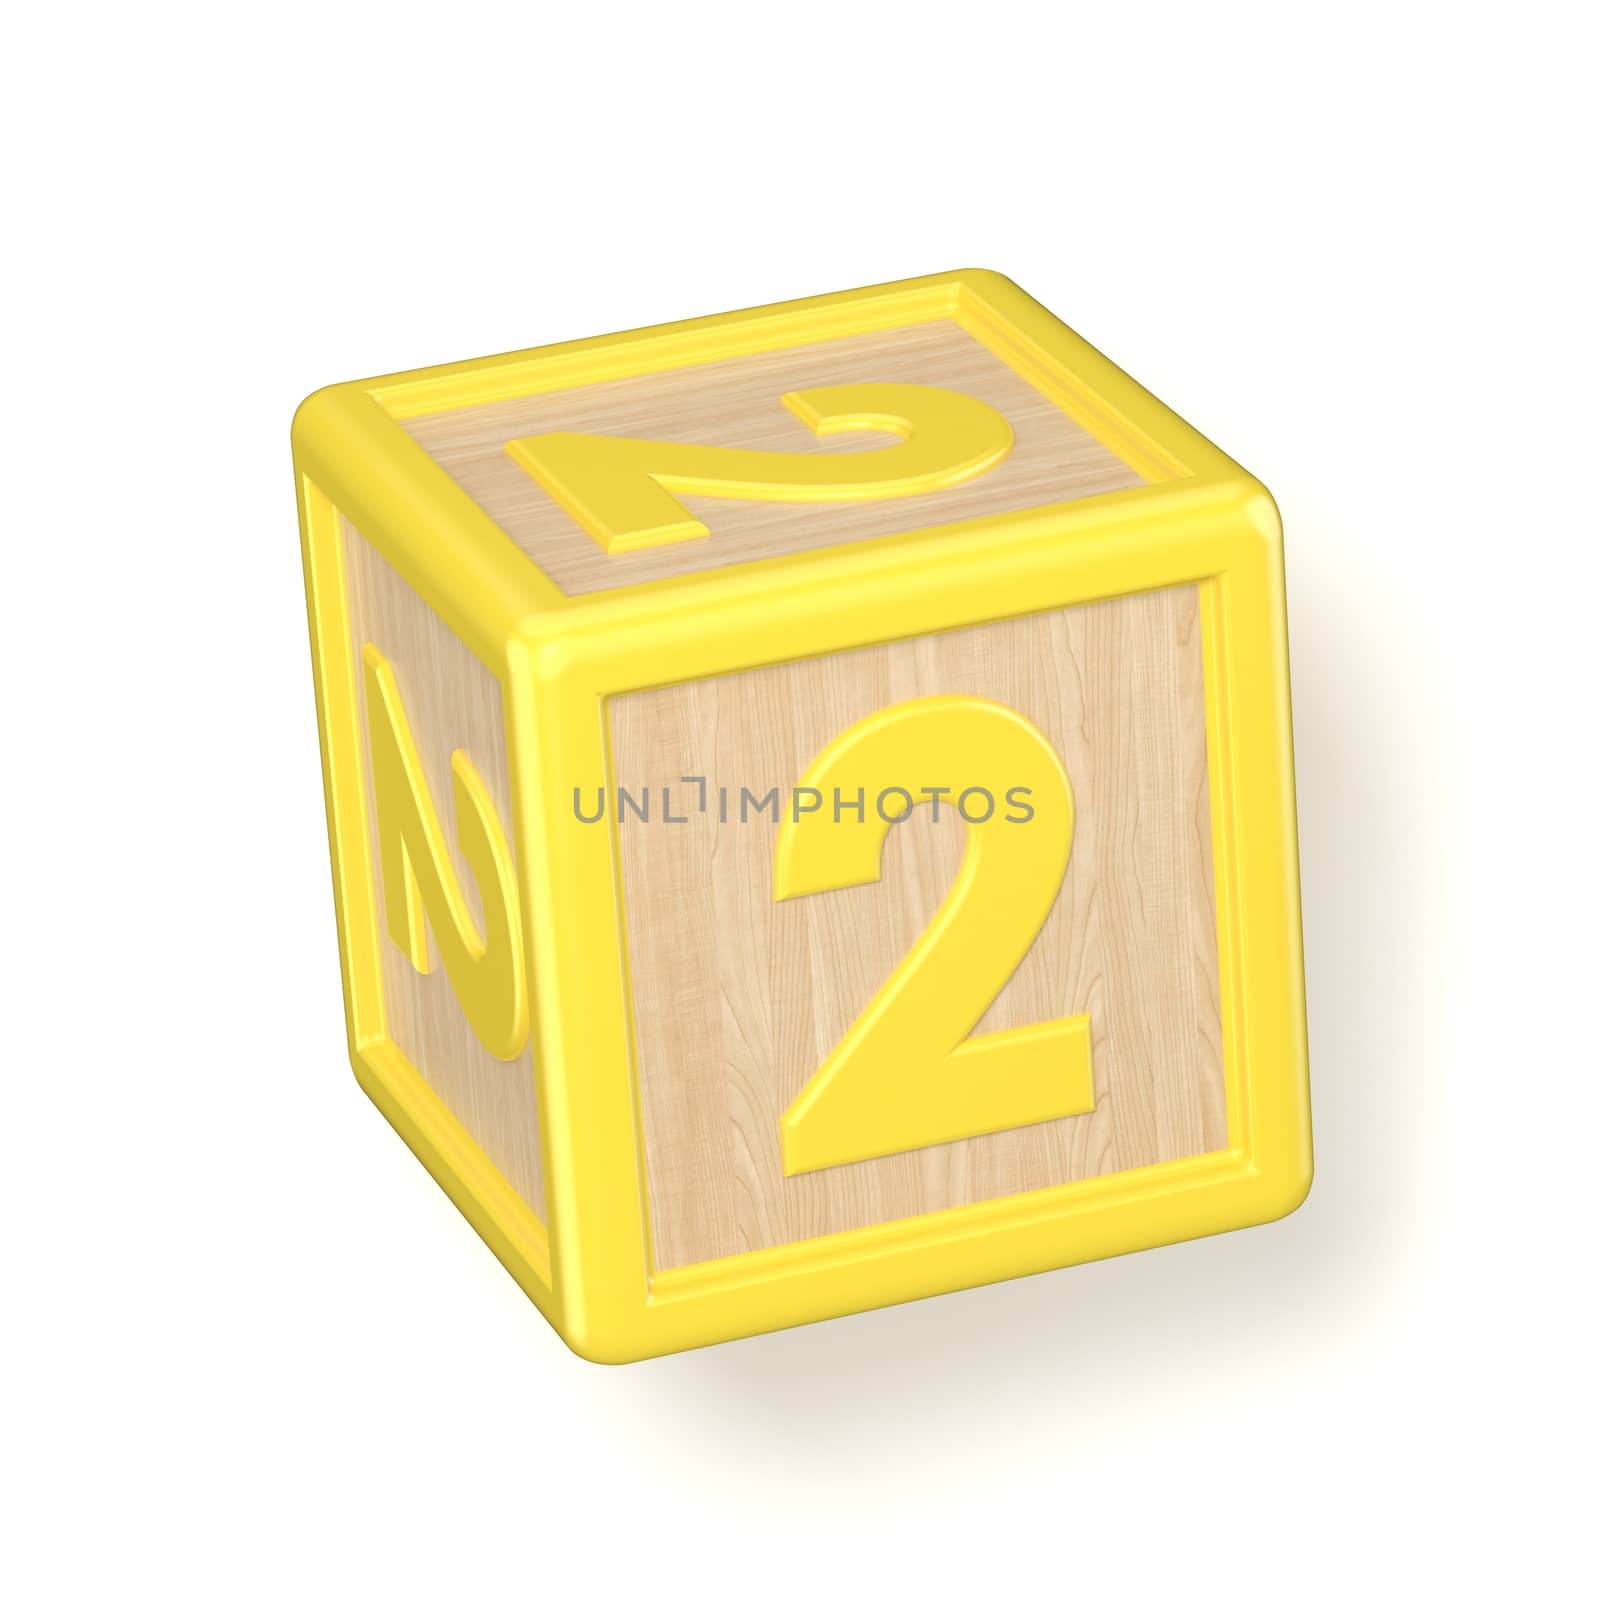 Number 2 TWO wooden alphabet blocks font rotated. 3D render illustration isolated on white background